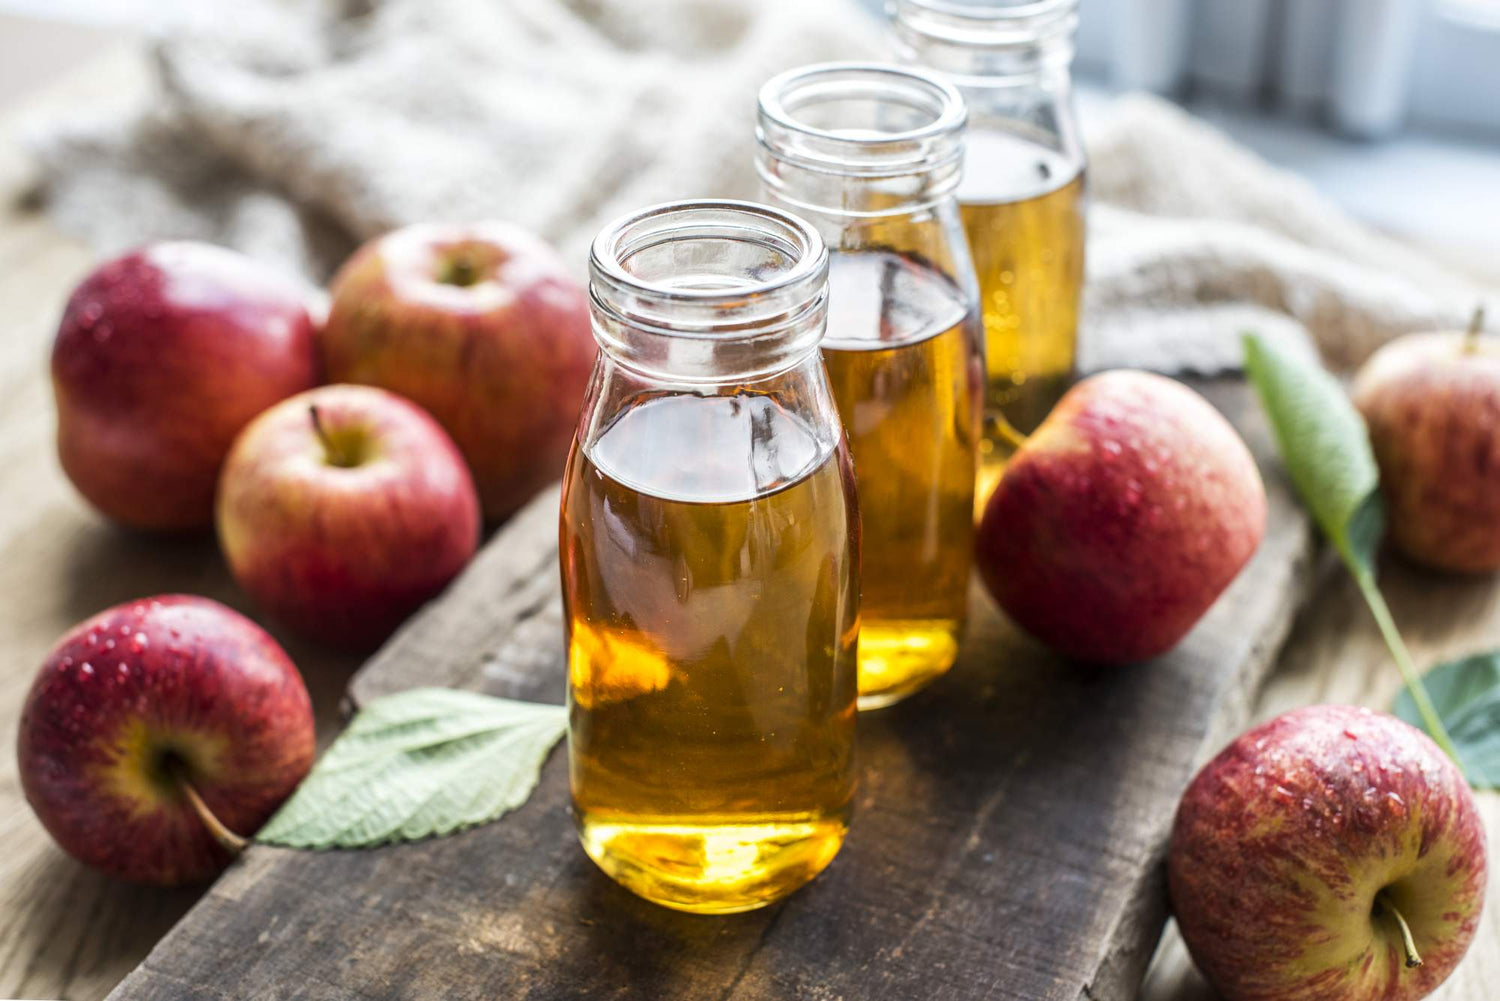 Apple vinegar and weight loss: what the science says